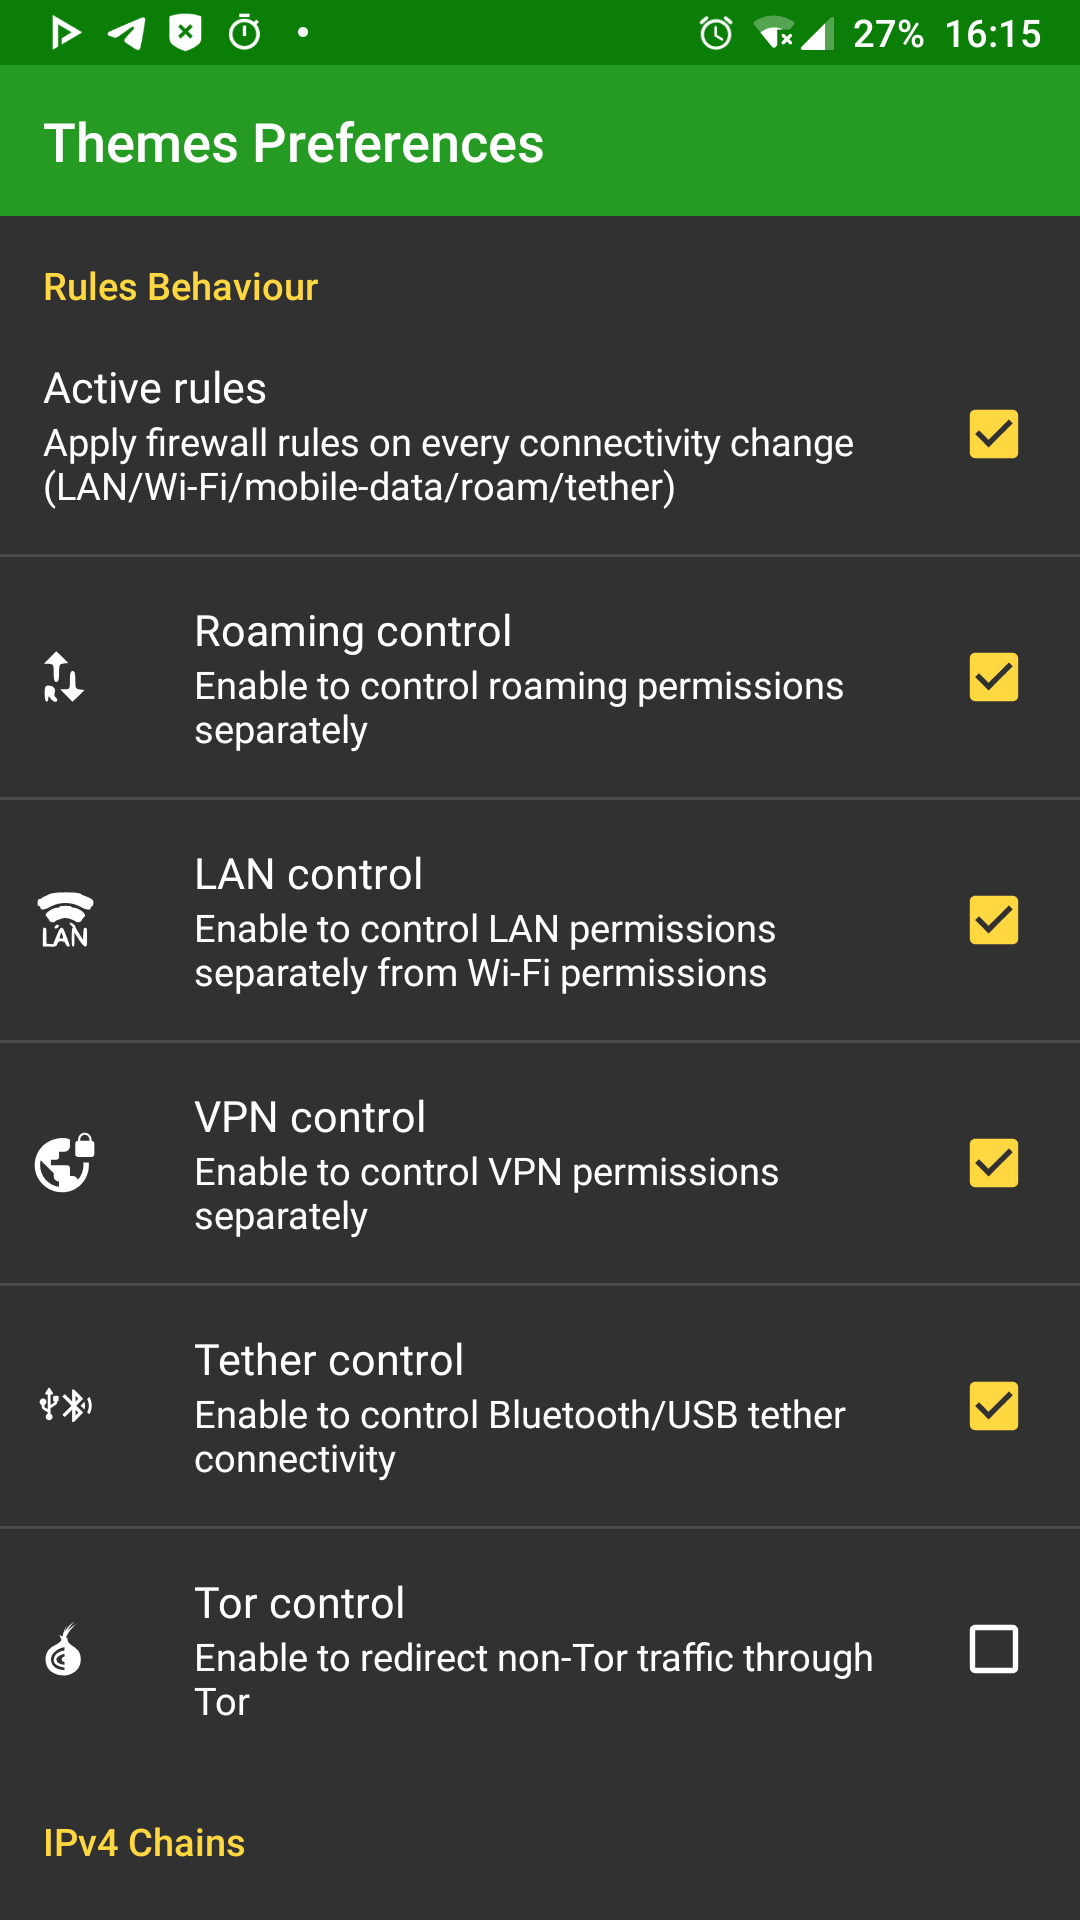 Connection control options AFWall+